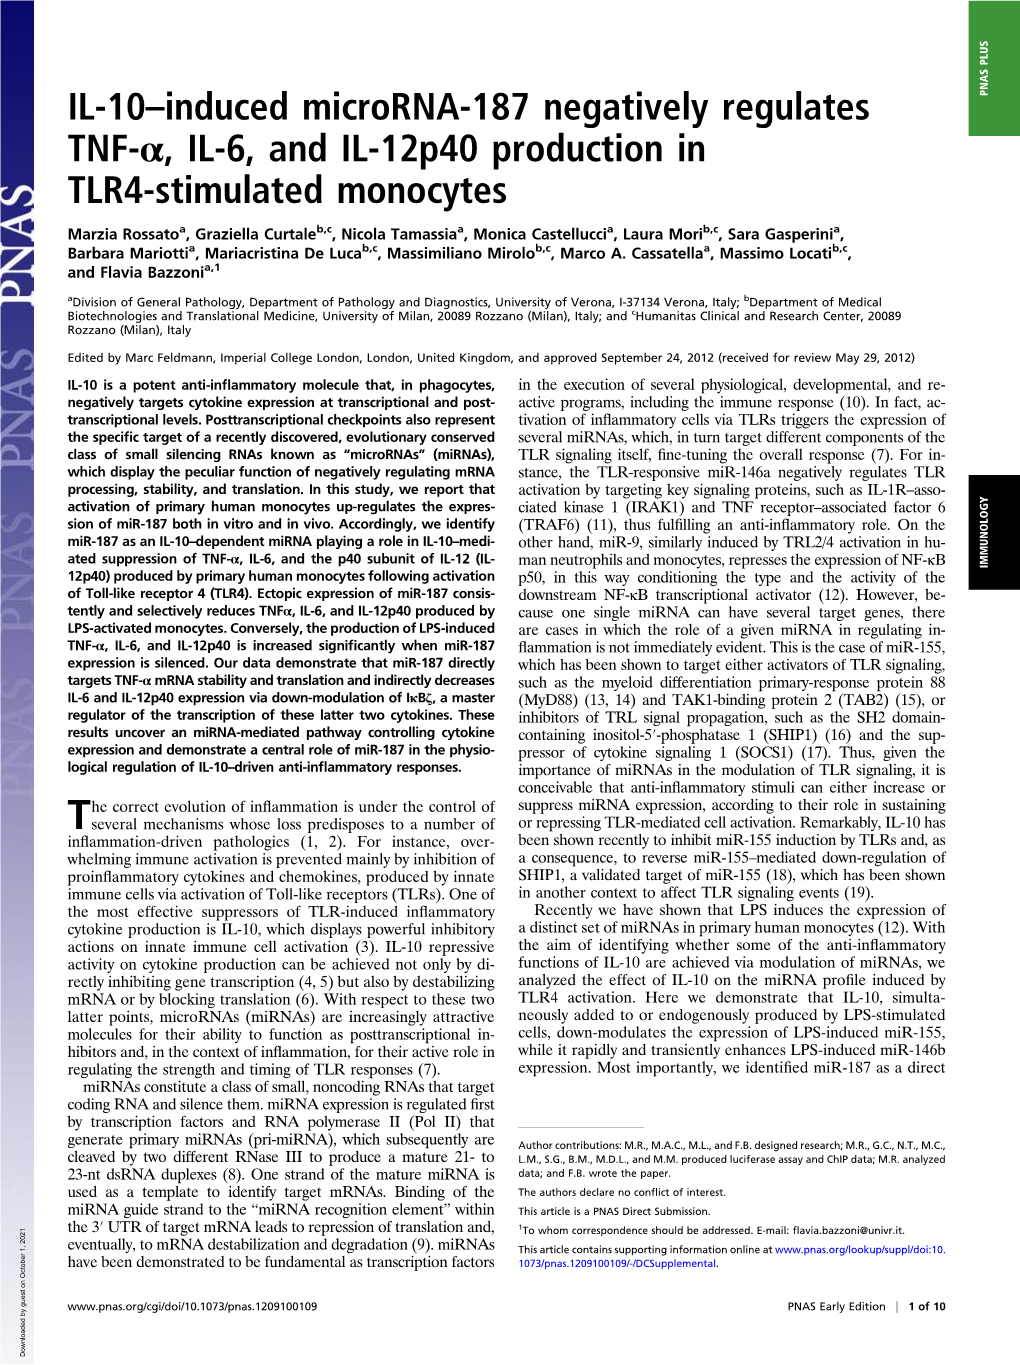 IL-10–Induced Microrna-187 Negatively Regulates TNF-Α